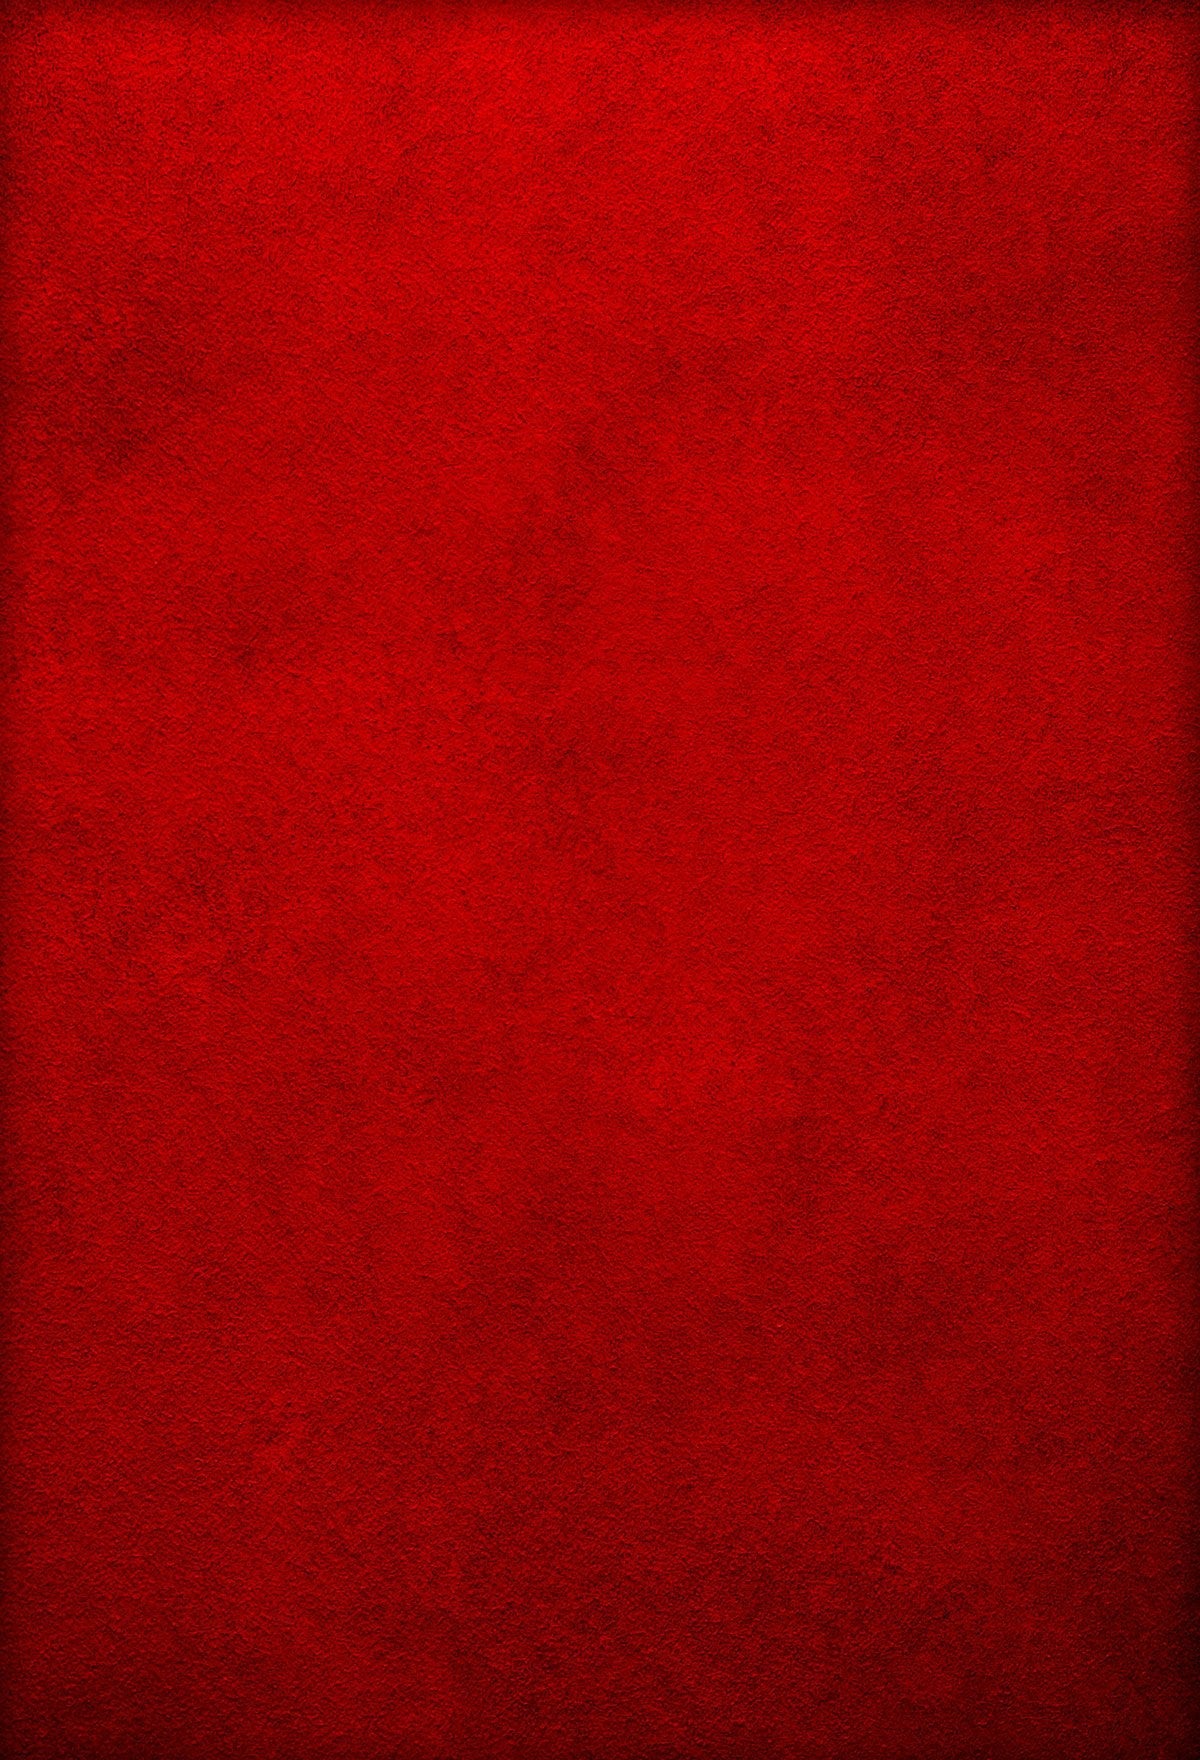 Katebackdrop：Kate Rich Red Color Backdrop Texture Abstract for head shots photos